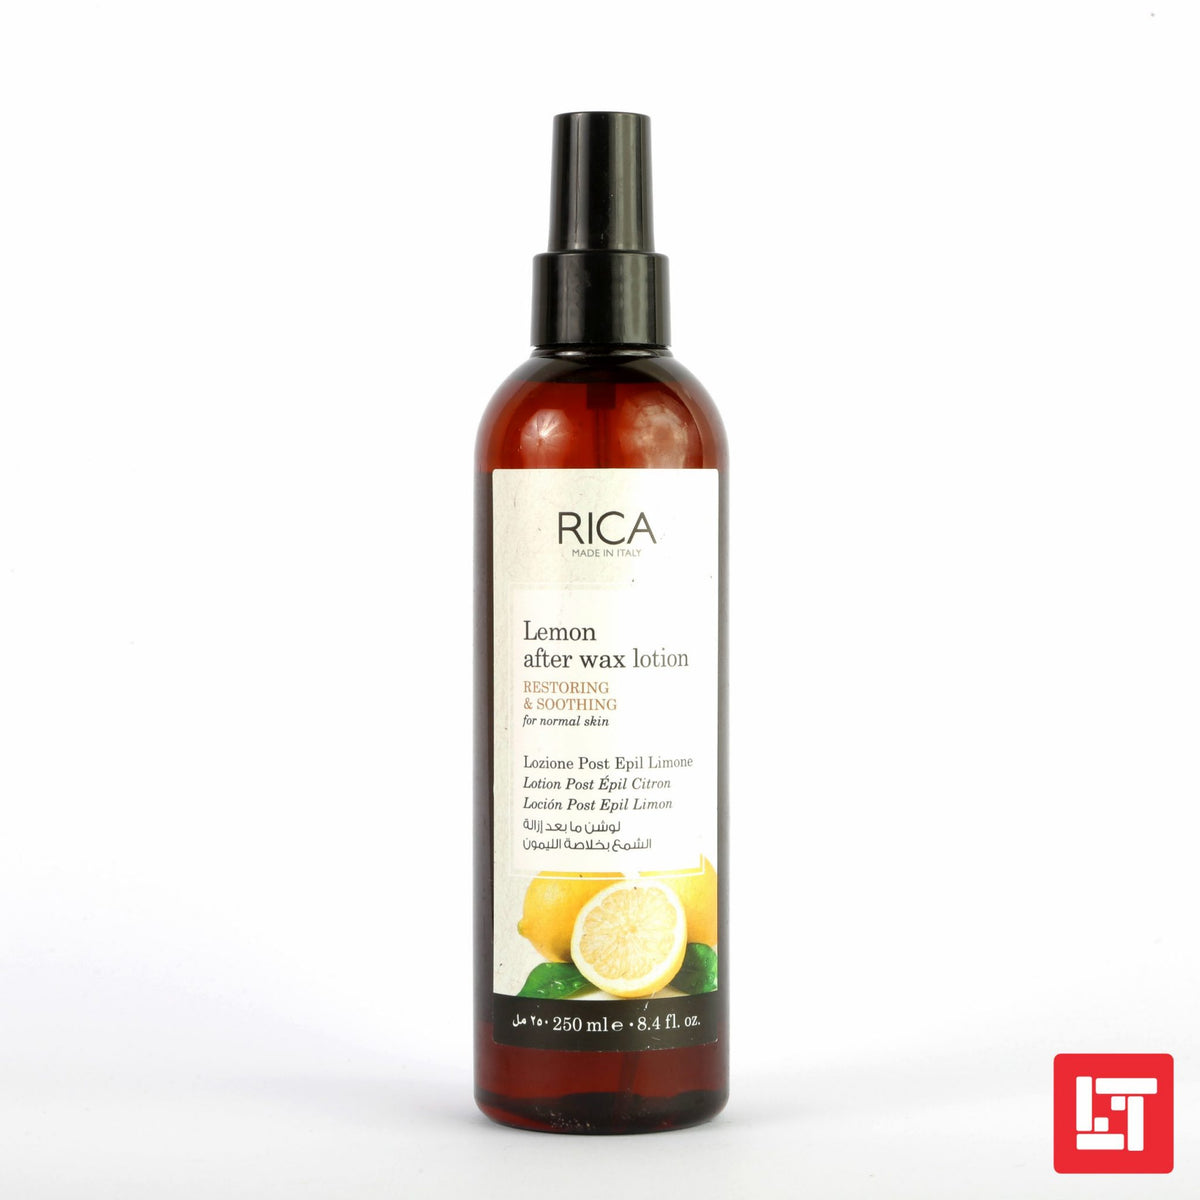 RICA Lemon after Wax Lotion Restoring &amp; Soothing for Normal Skin 250ml freeshipping - lasertag.pk